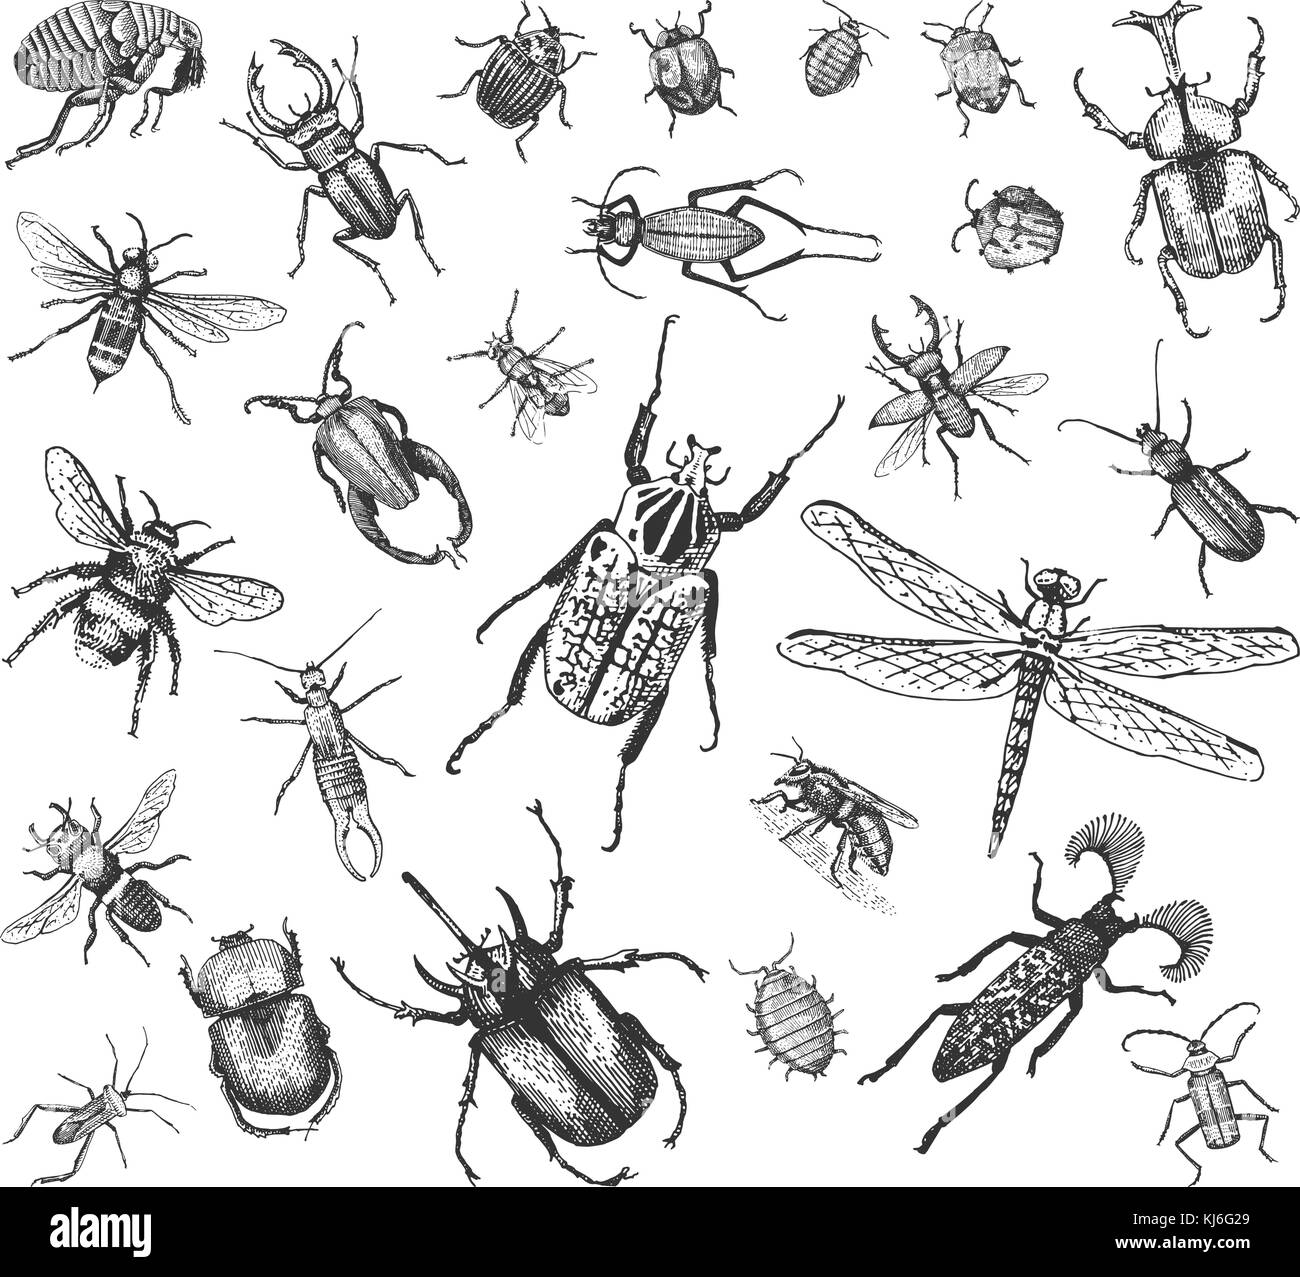 big set of insects bugs beetles and bees many species in vintage old hand drawn style engraved illustration woodcut. Stock Vector